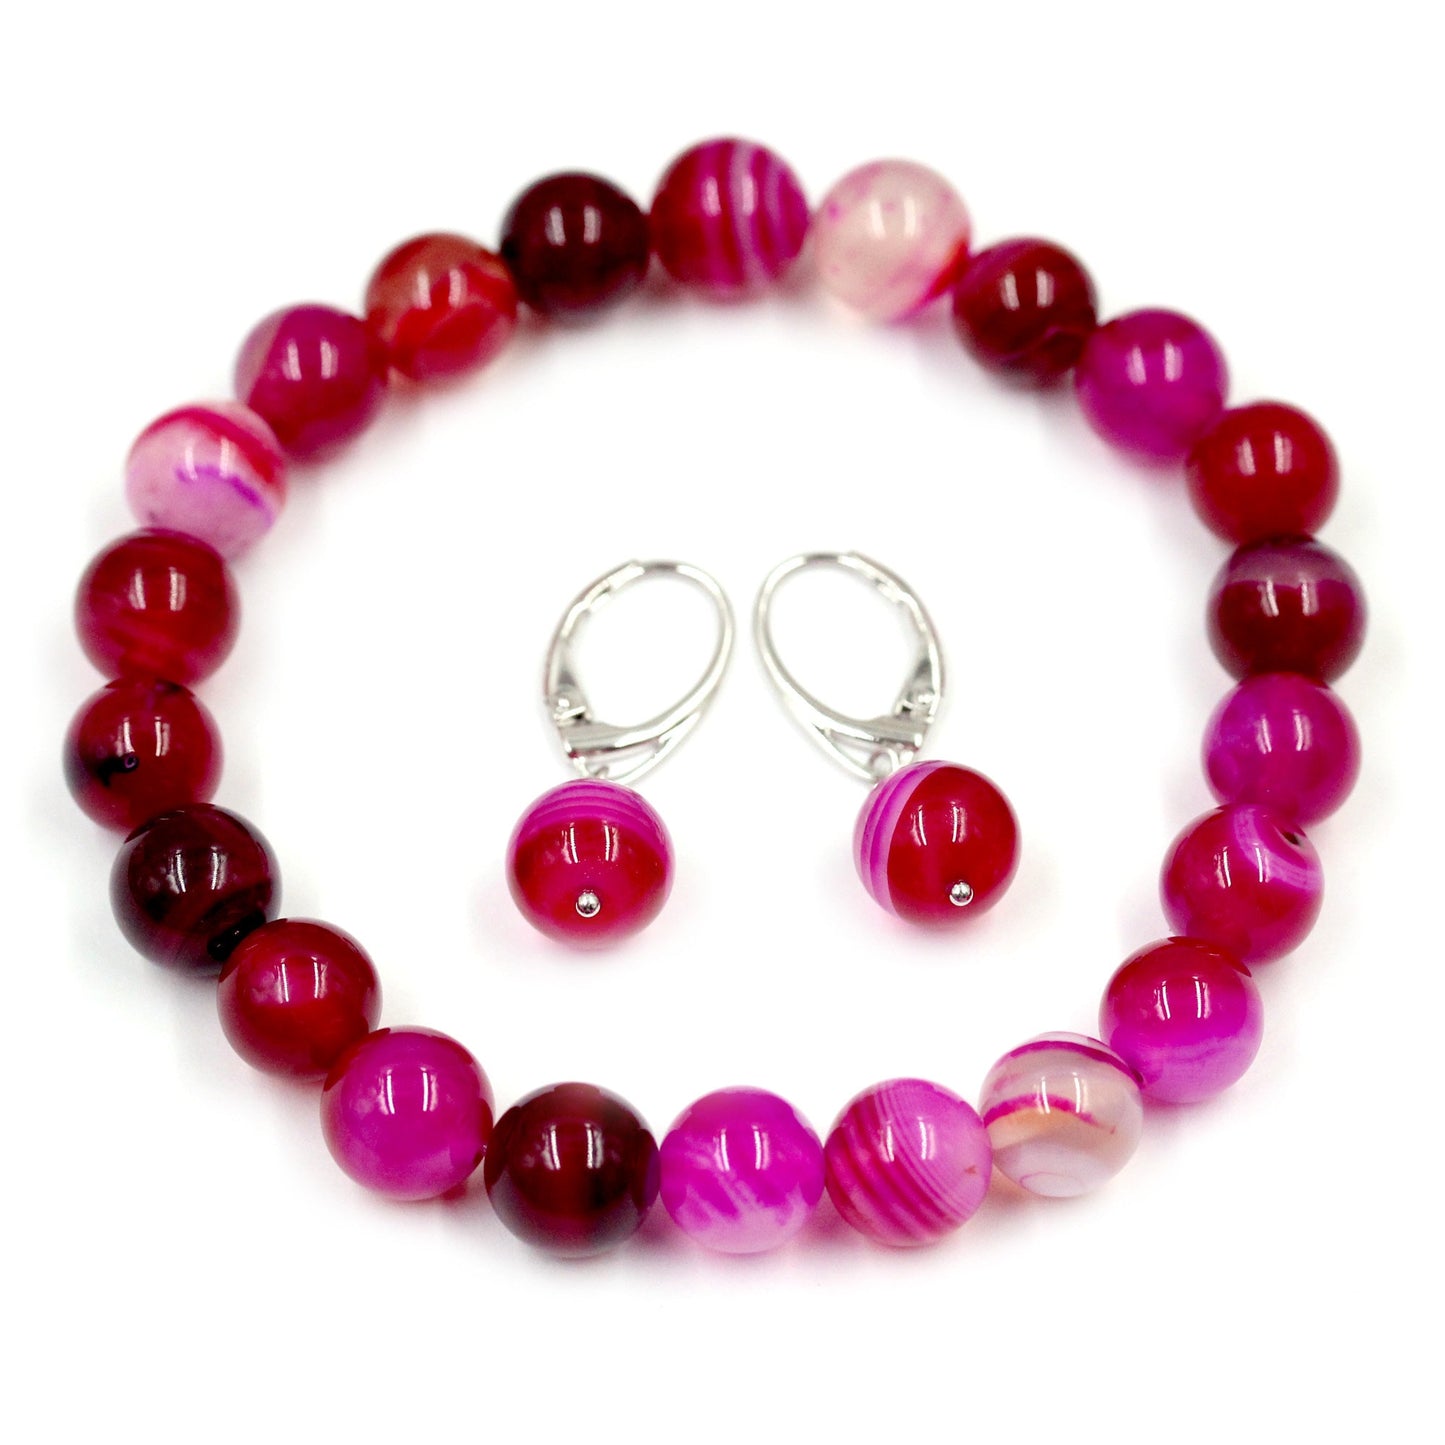 Natural Pink Agate Beads Bracelet With Earring Set, Boho Jewelry Set, Natural Gemstone Jewelry, Jewelry For Women's Anniversary Gift For Her